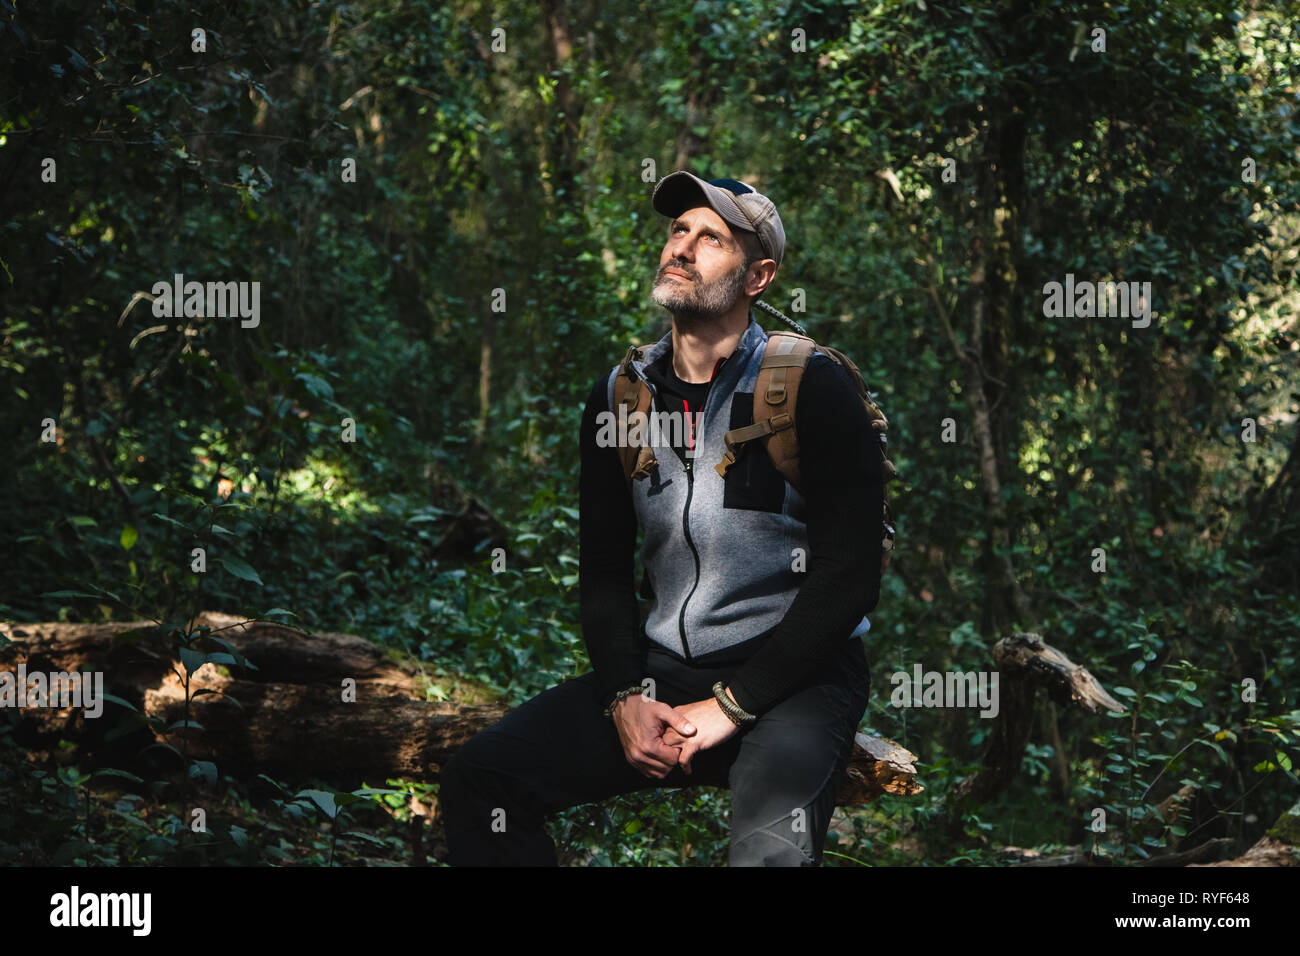 Man sitting on a trunk of a tree with backpack in a green wild forest relaxing and enjoying the sunlight Stock Photo